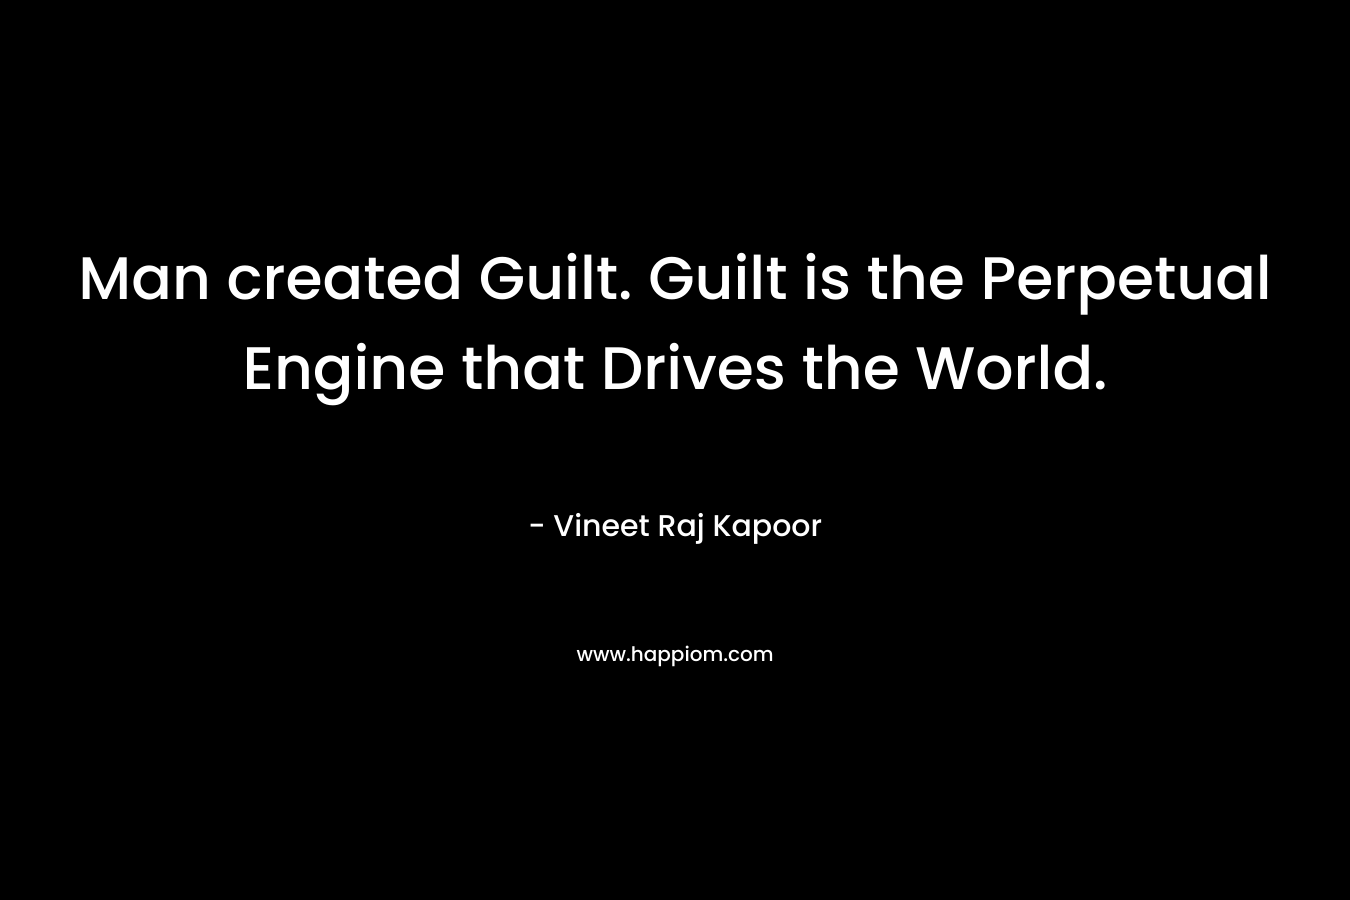 Man created Guilt. Guilt is the Perpetual Engine that Drives the World.